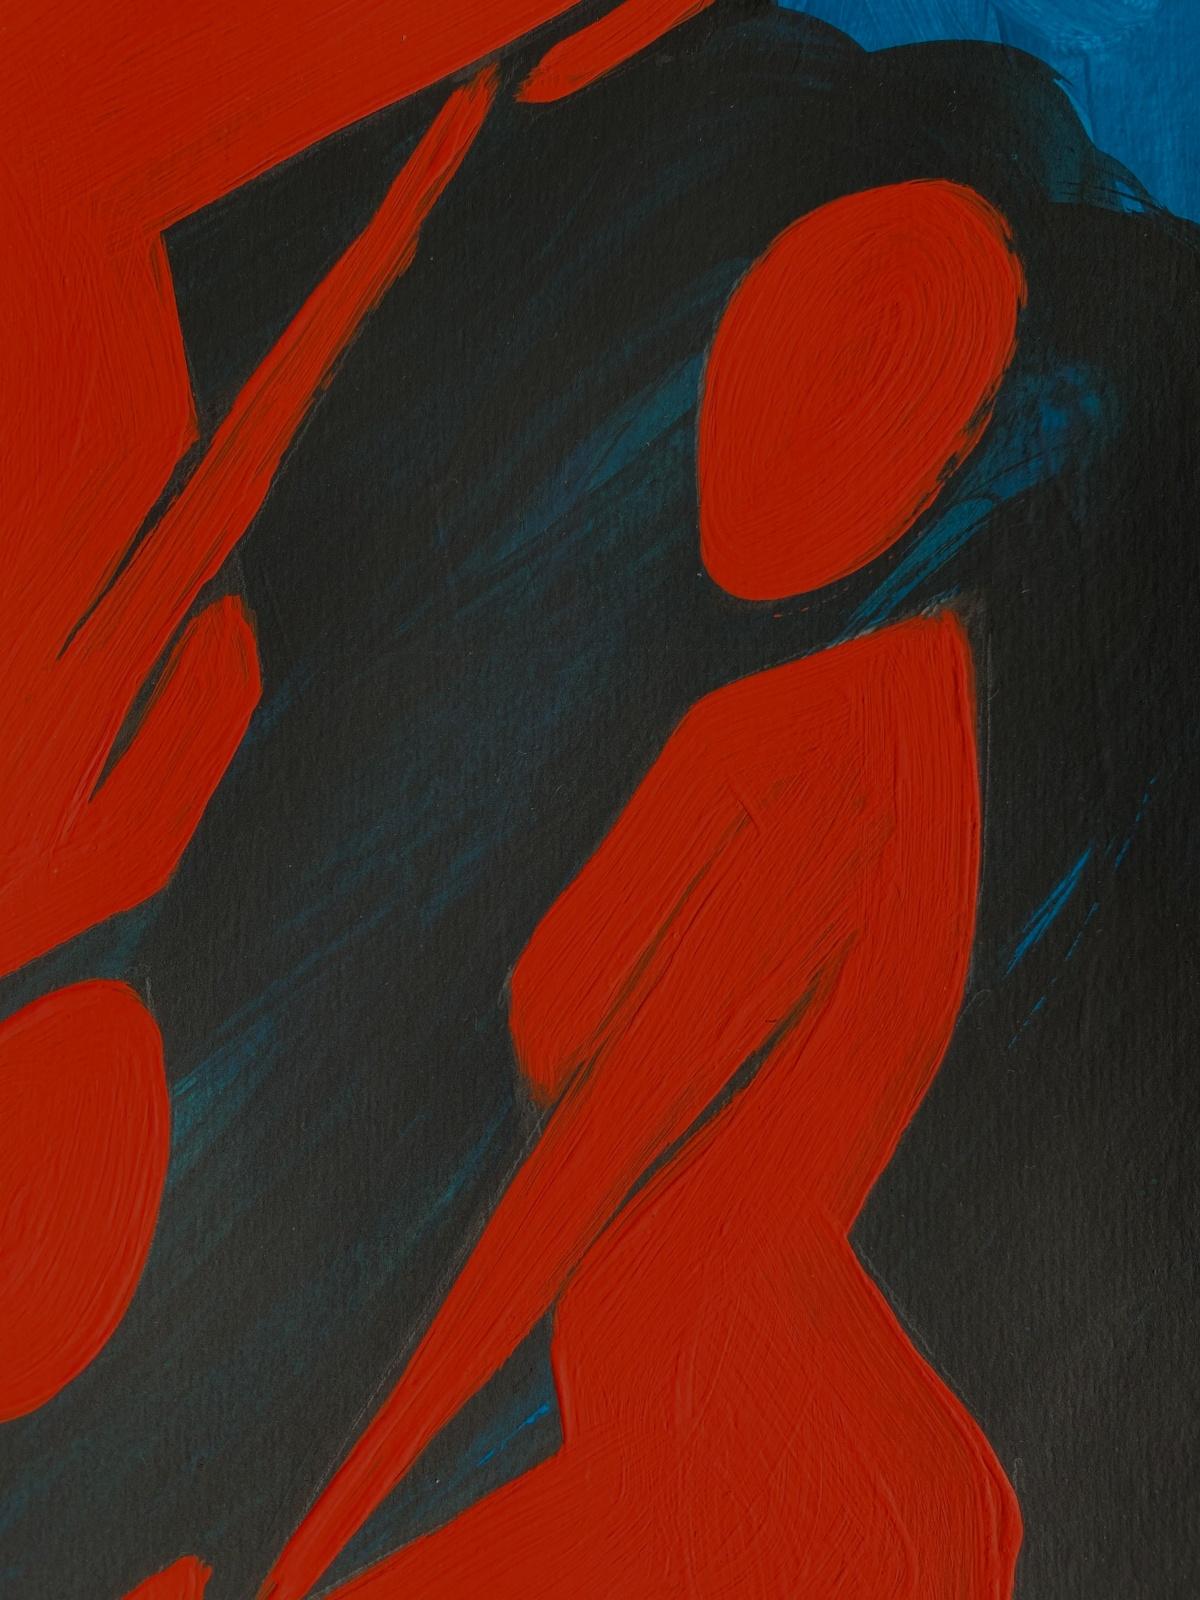 Red women - Figurative Painting on Paper, Young art, Minimalism, Vibrant  For Sale 2